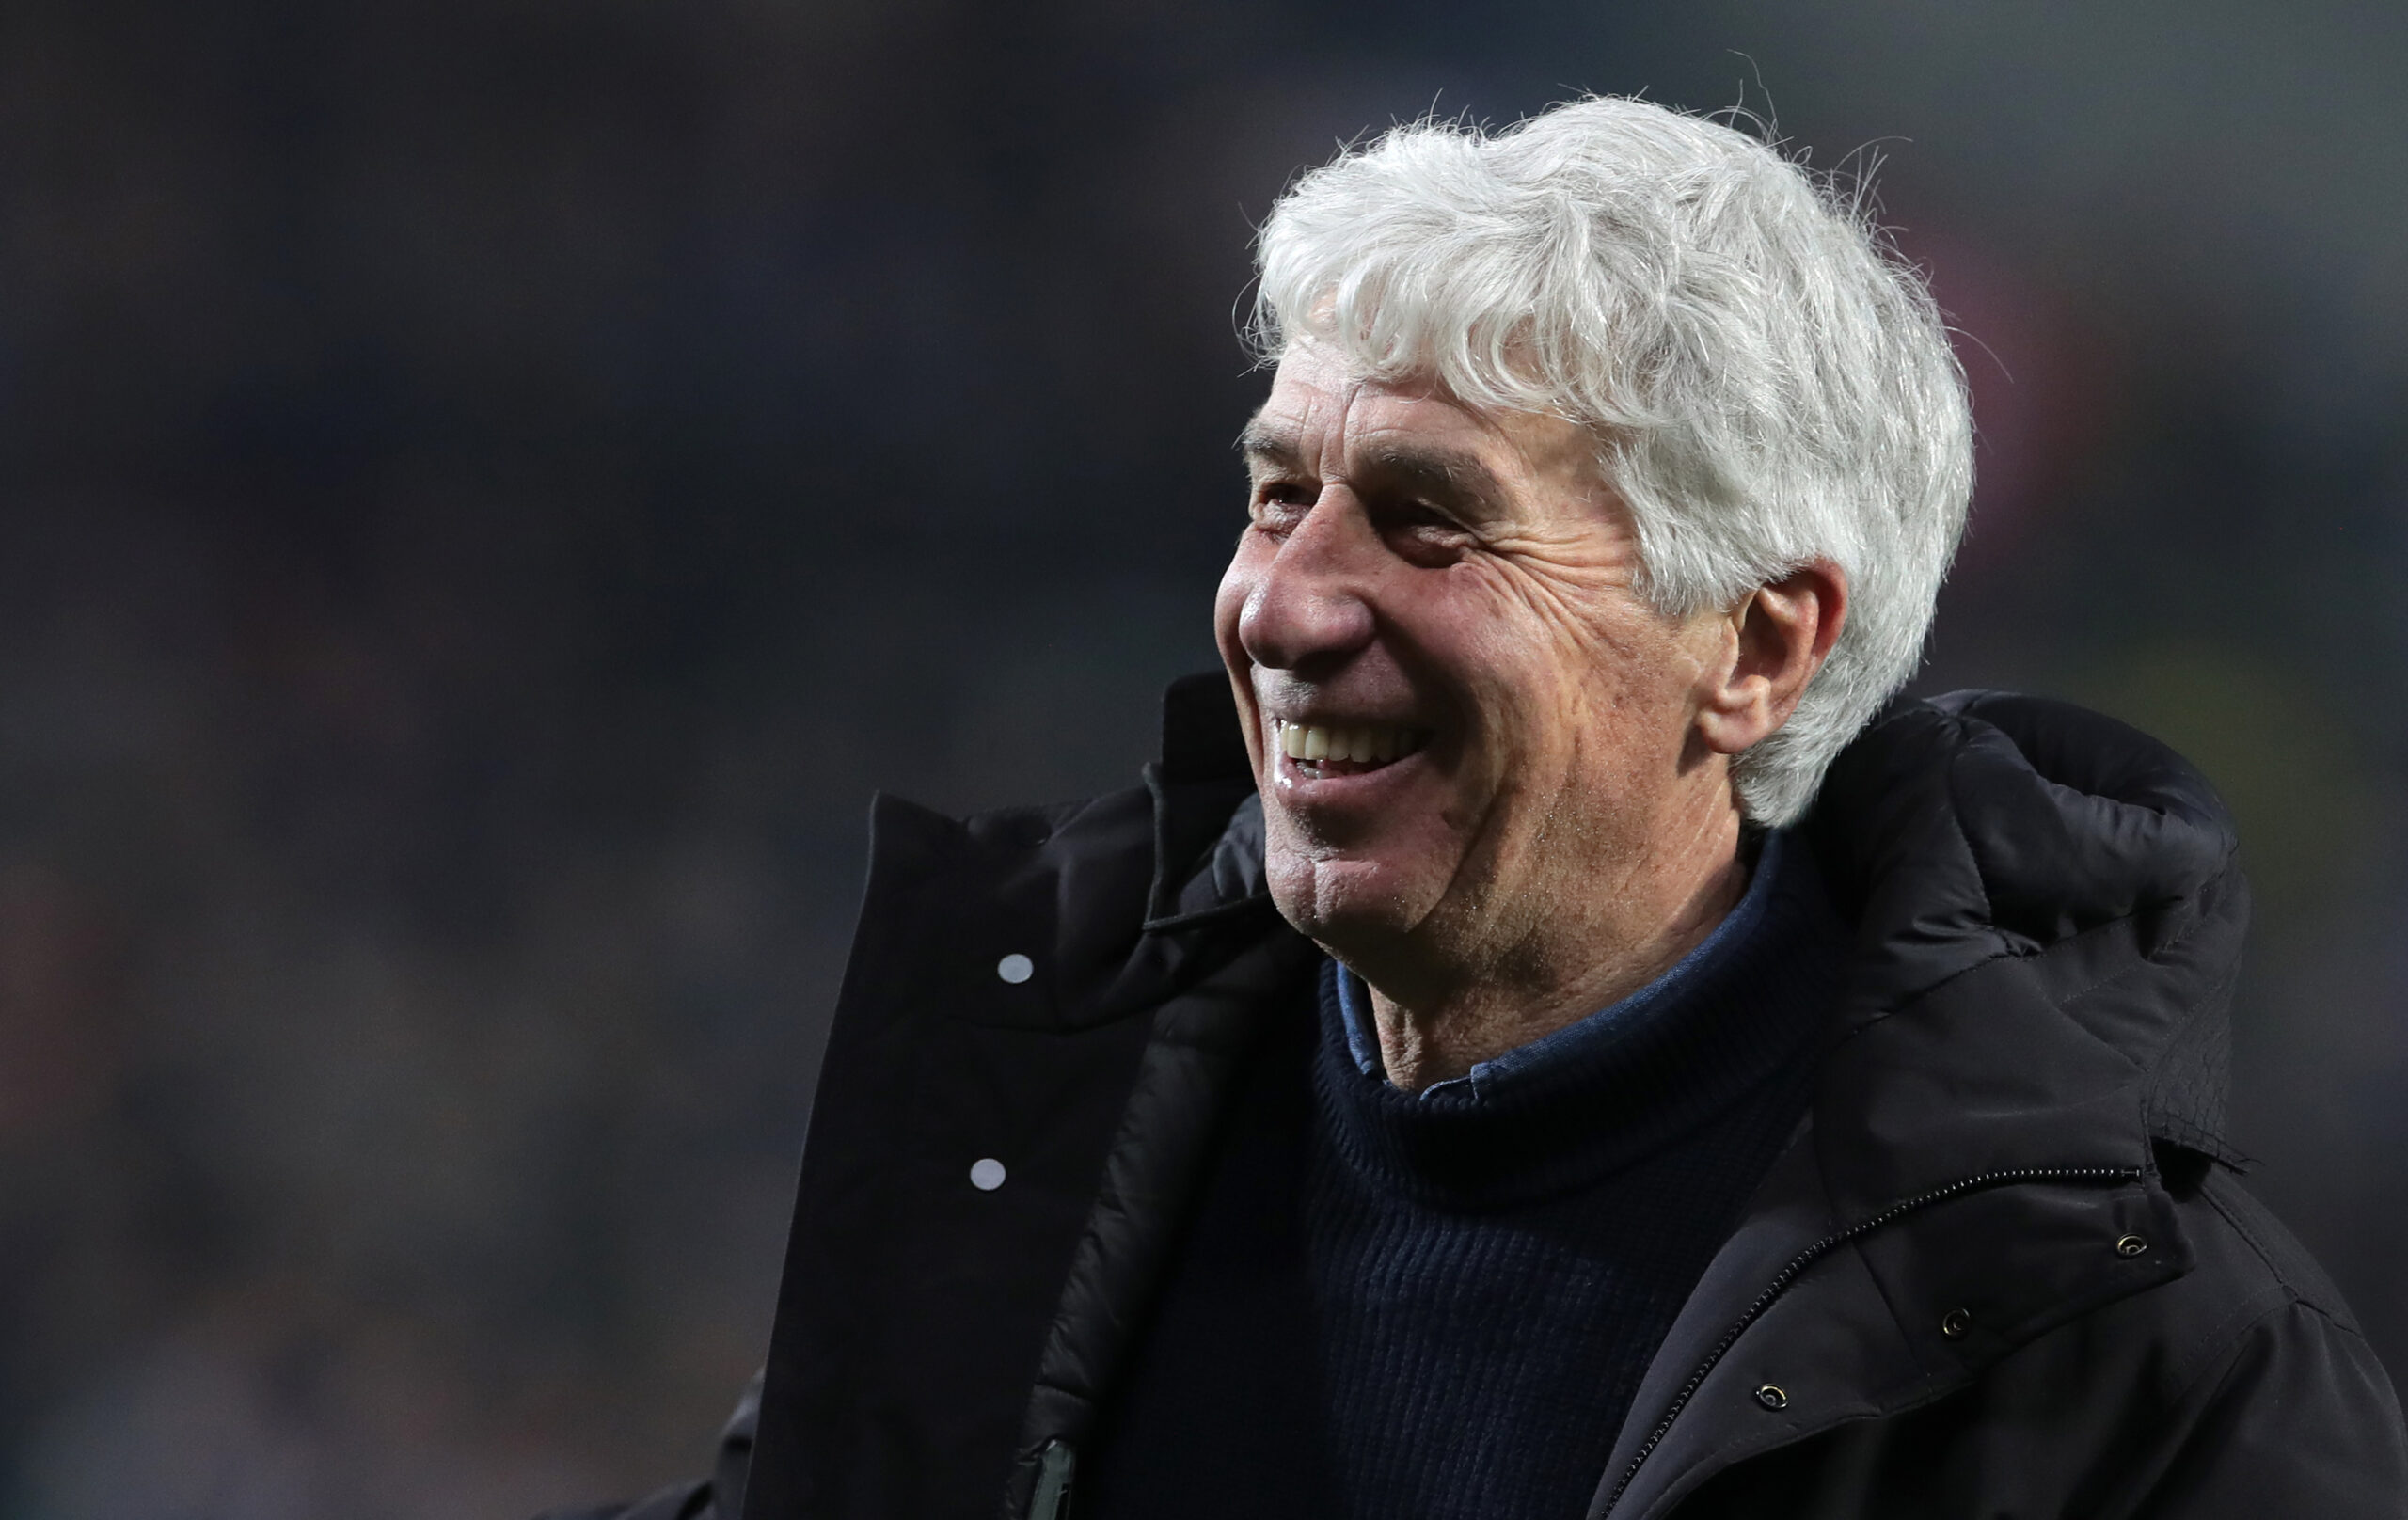 Napoli intend to open a new multi-year cycle and, in addition to chasing Antonio Conte, they will make an attempt for Gian Piero Gasperini.